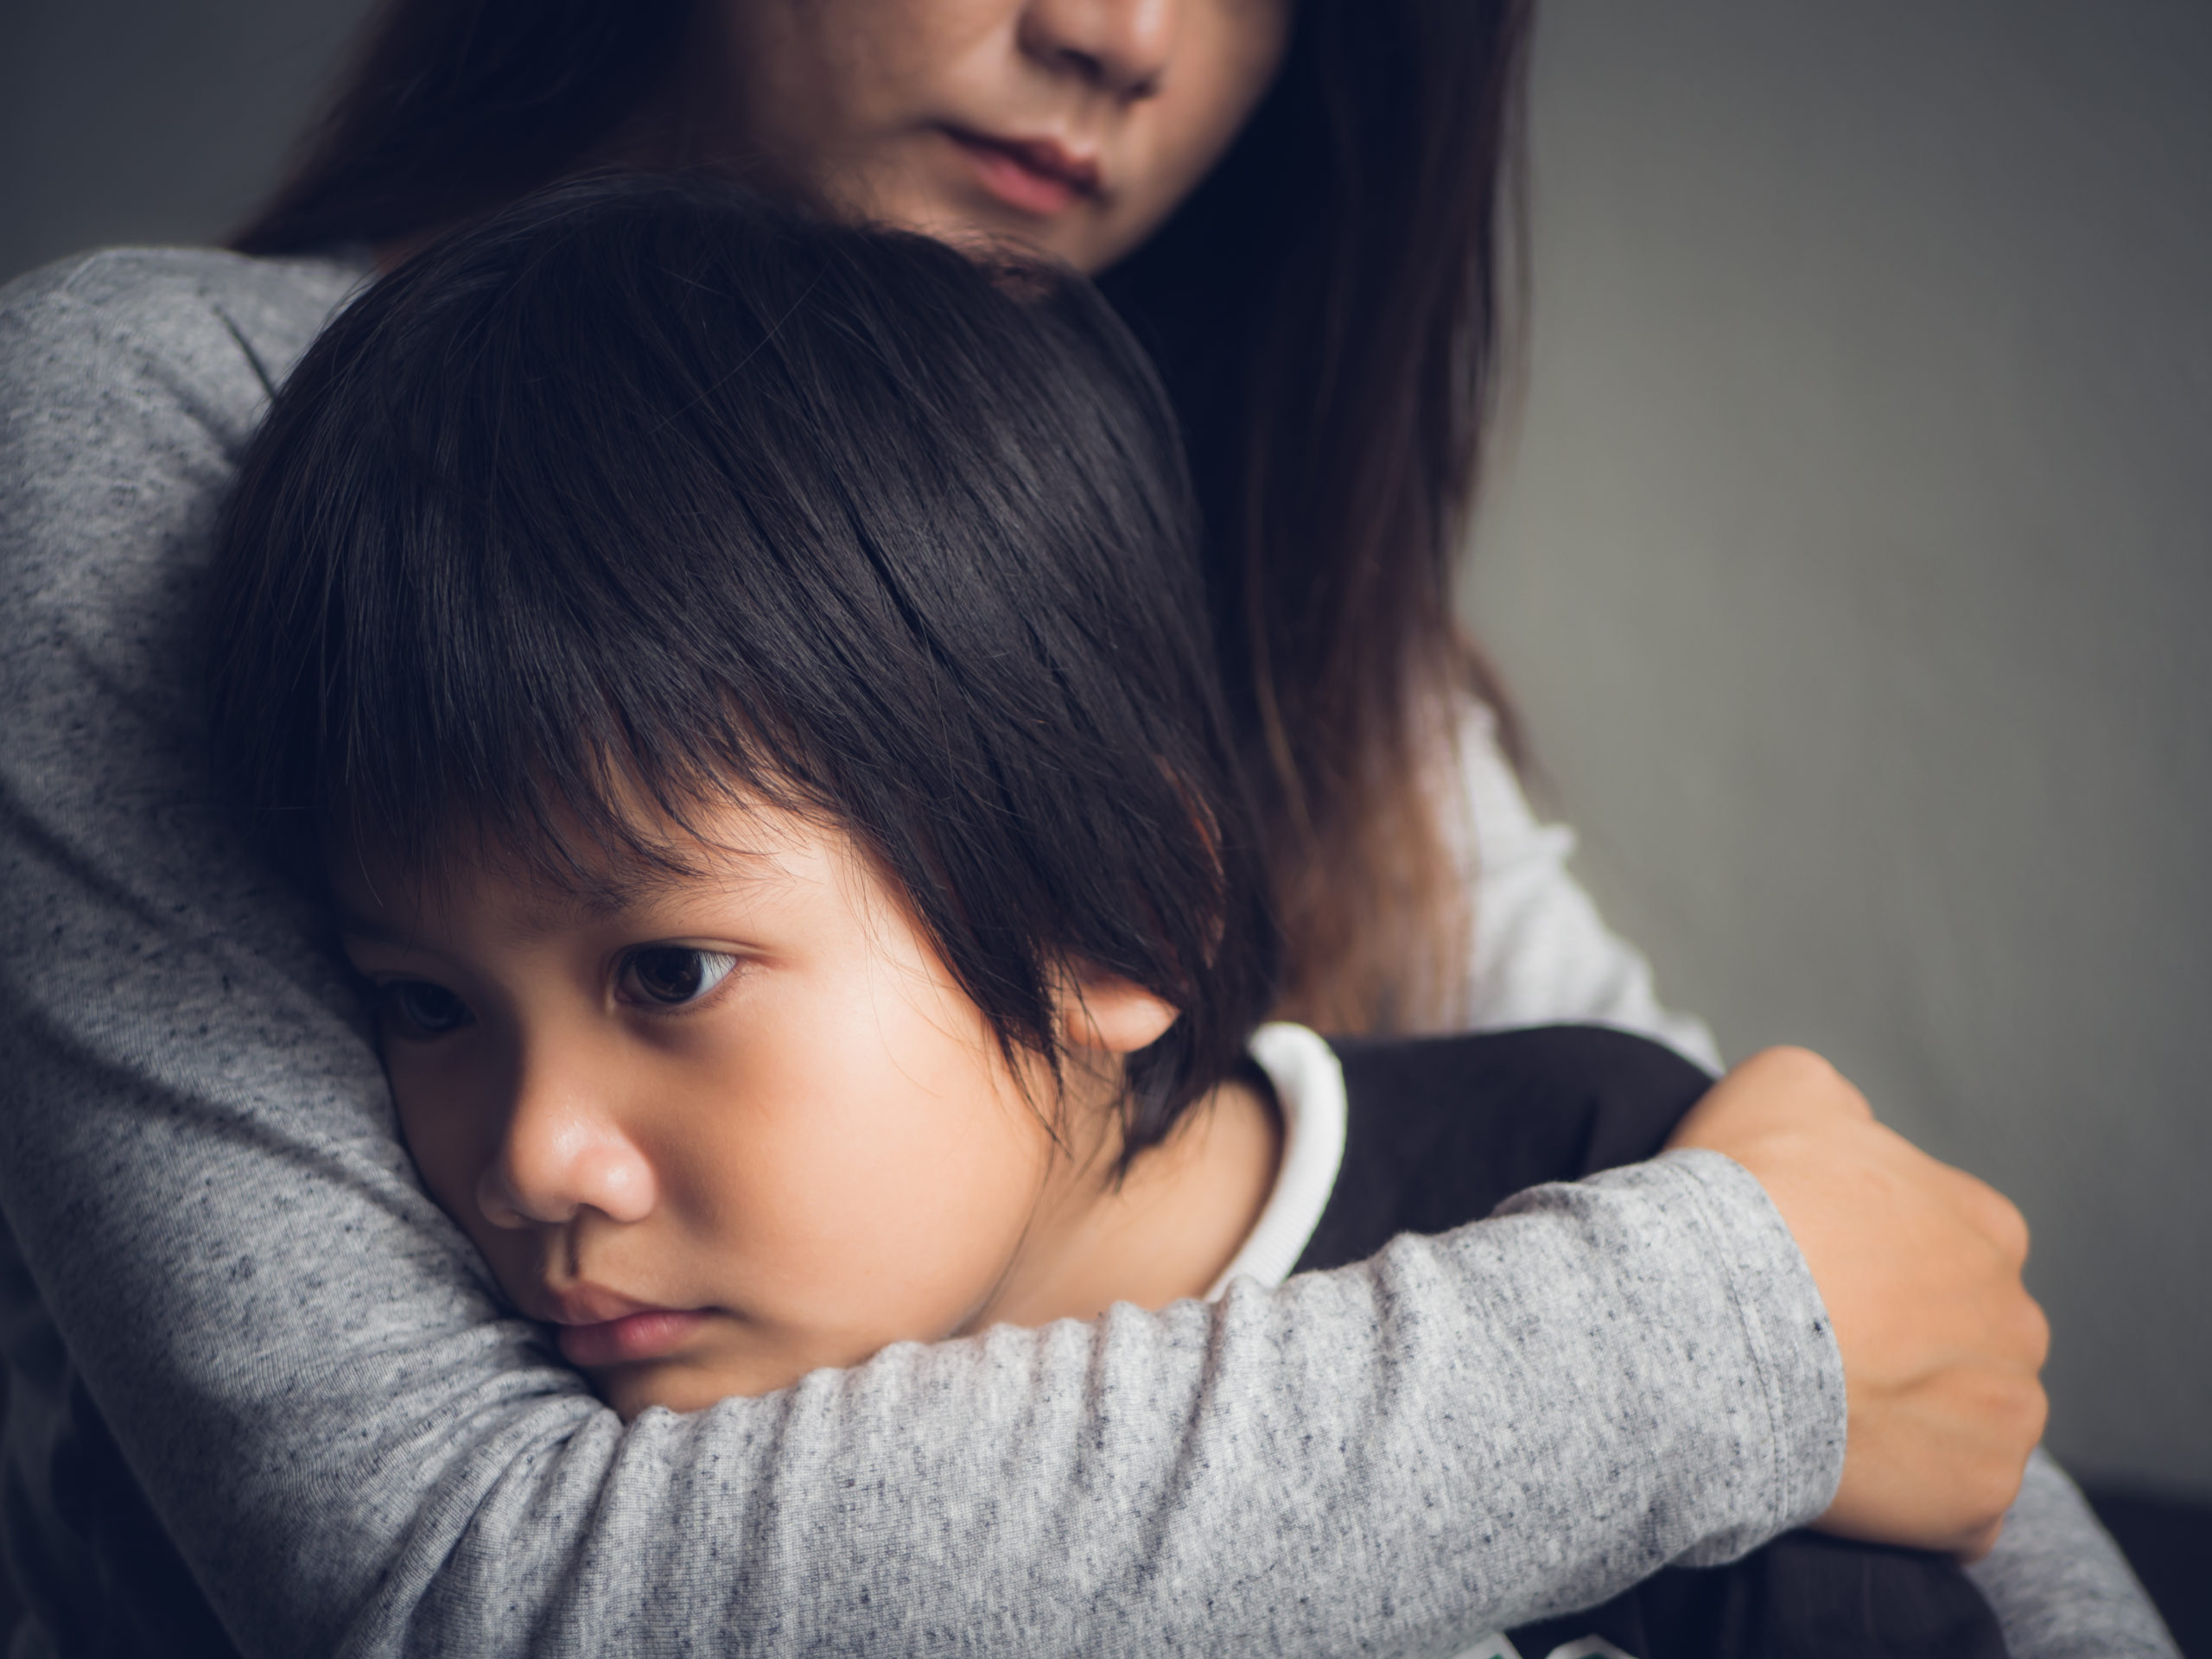 How Can I Ensure the Best Interests of My Child in a Divorce?